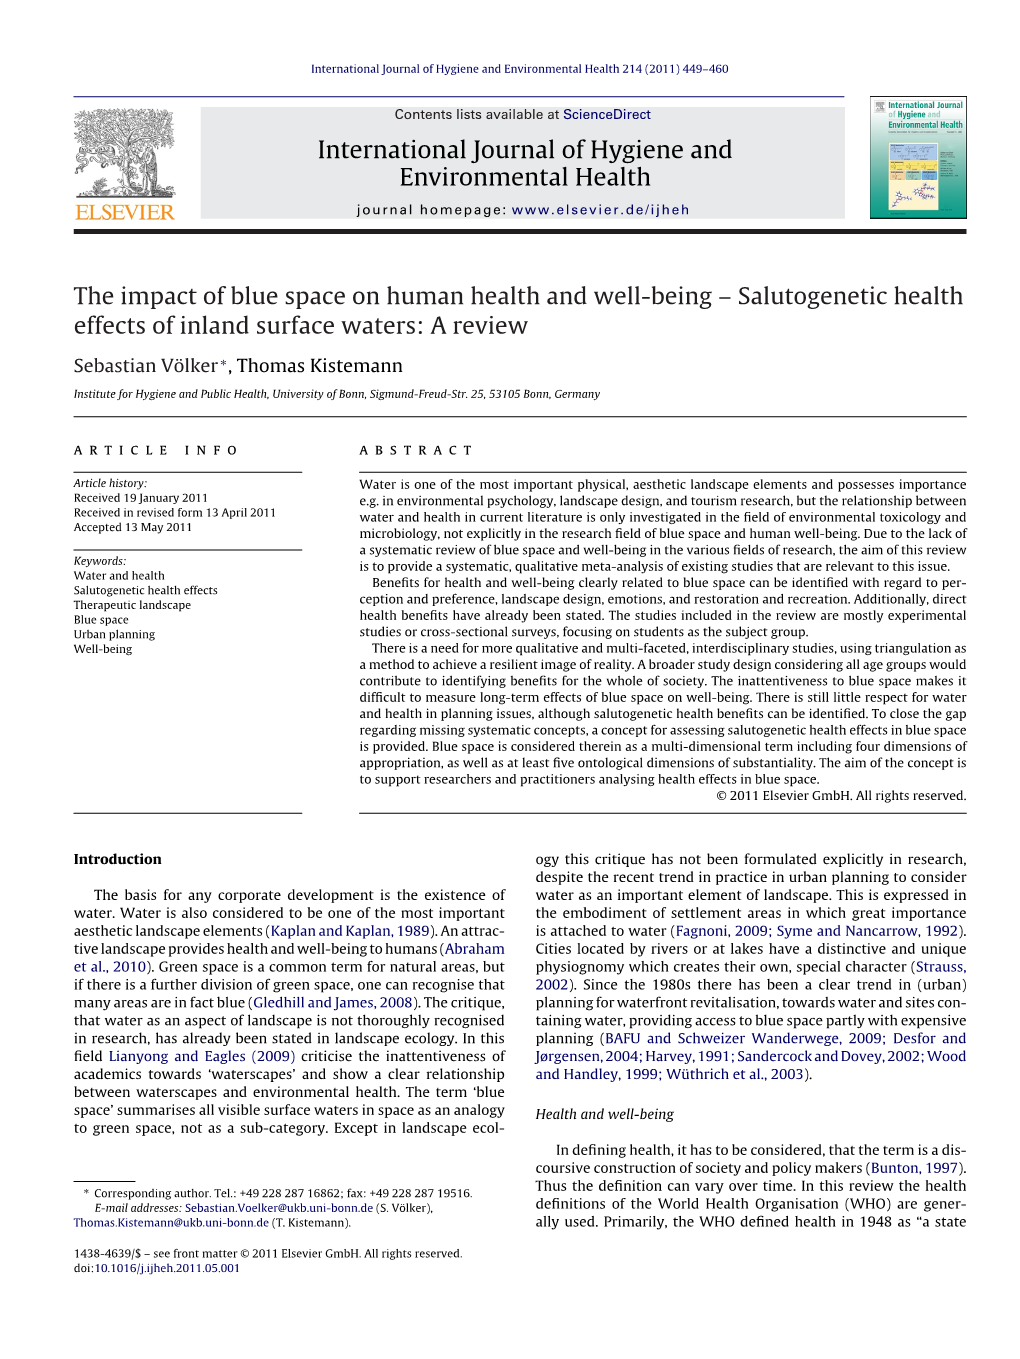 The Impact of Blue Space on Human Health and Well-Being Â€“ Salutogenetic Health Effects of Inland Surface Waters: a Review